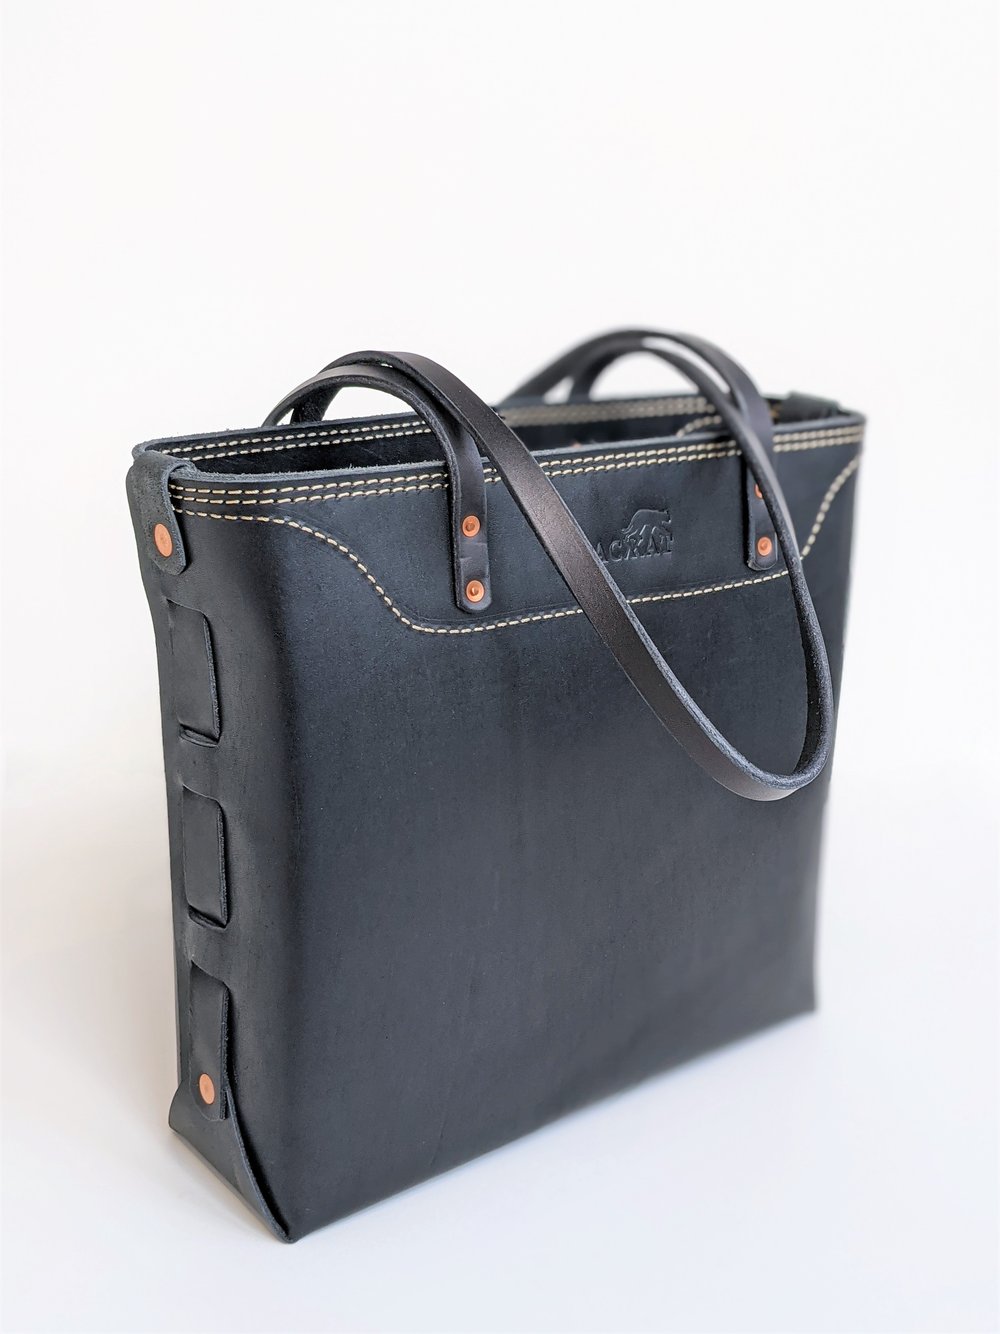 The Poet Black Leather Tote Bag | TruCarry by The Jacket Maker